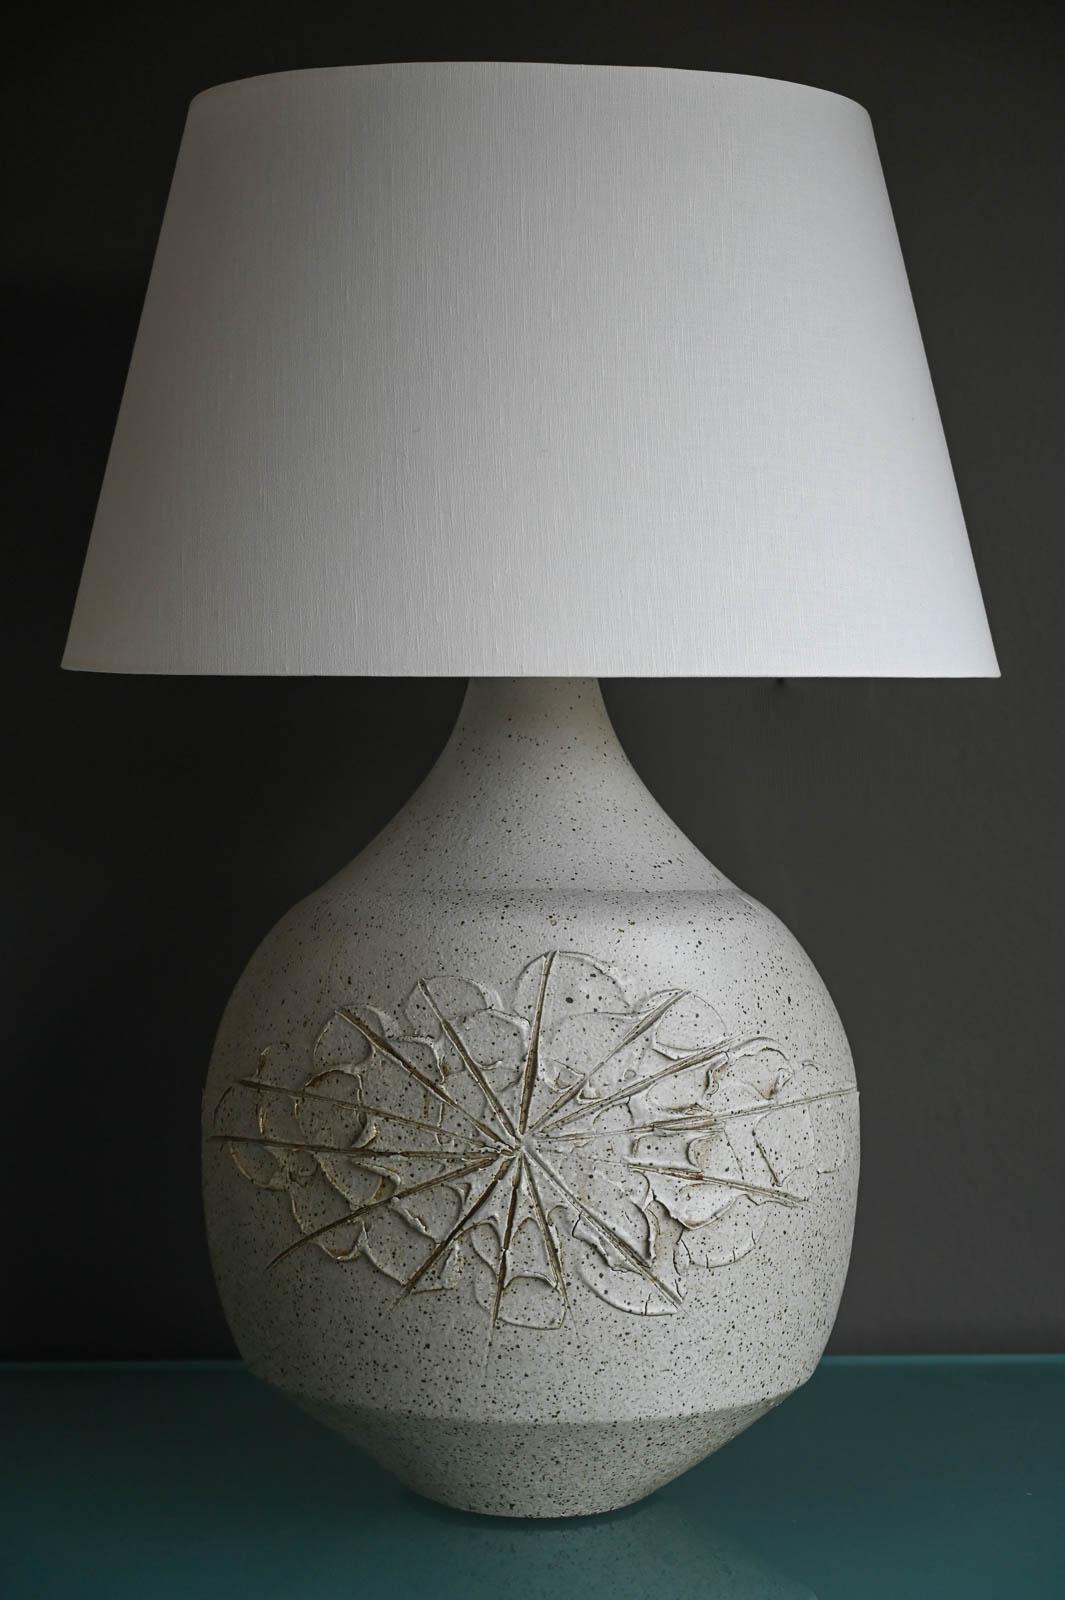 David Cressey 'Solar' Ceramic Lamp, ca. 1970.  Beautiful grey speckled glazed Solar pattern, one of his most desirable designs in this lamp.  Excellent vintage condition with new lamp wiring and fixtures.  Includes lampshade.  

Measures 16